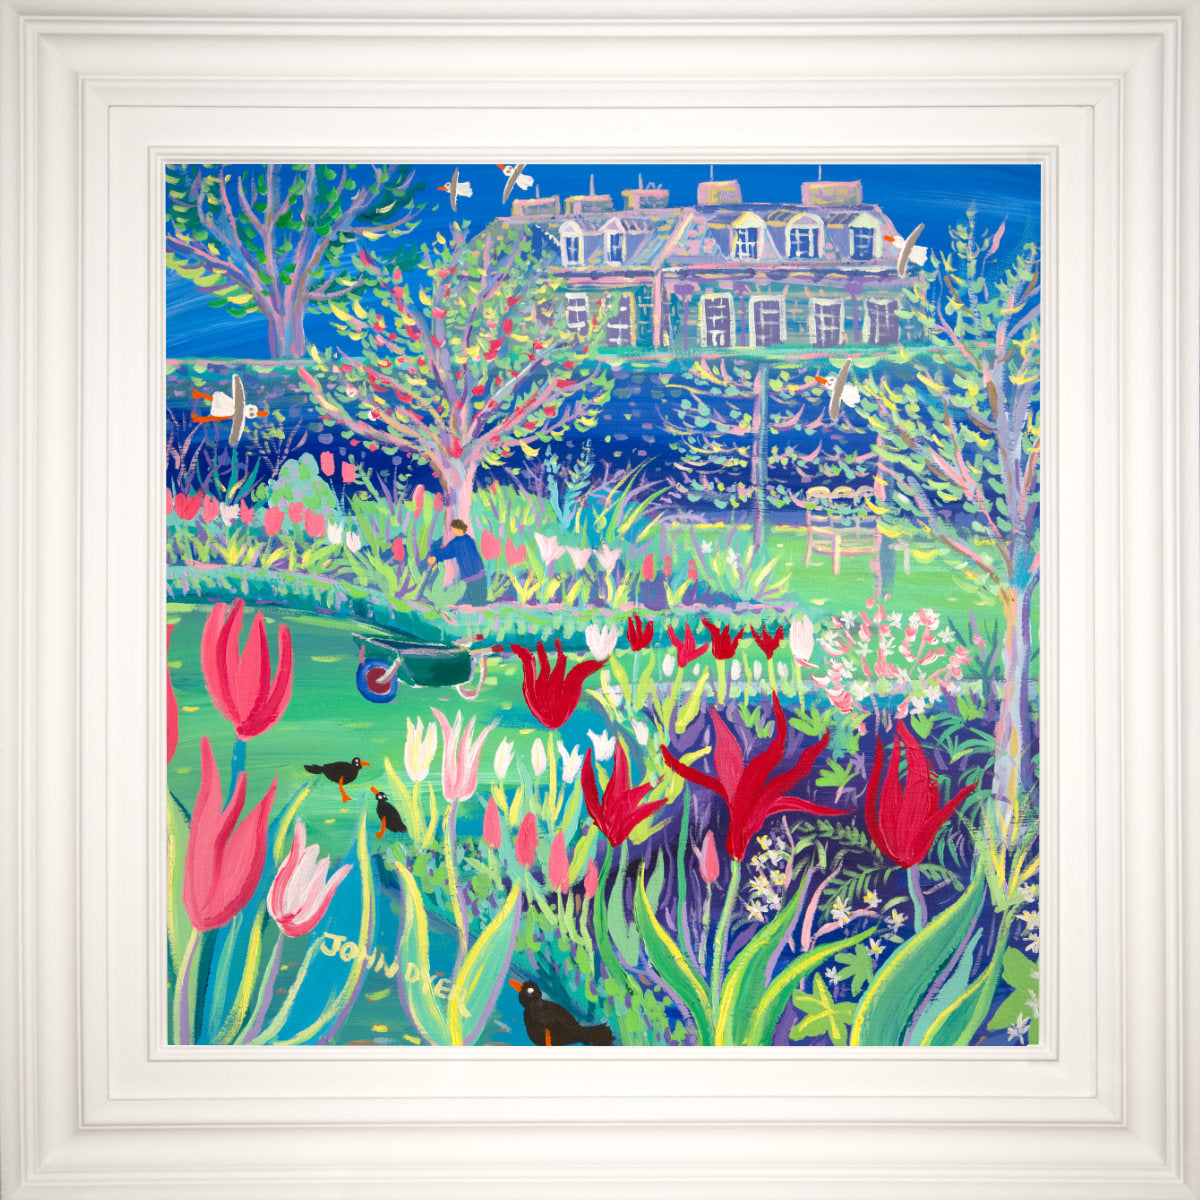 'The Flower Garden Antony House', 24x24 inches acrylic on canvas. Cornwall Painting by Cornish Artist John Dyer. Cornwall Art Gallery